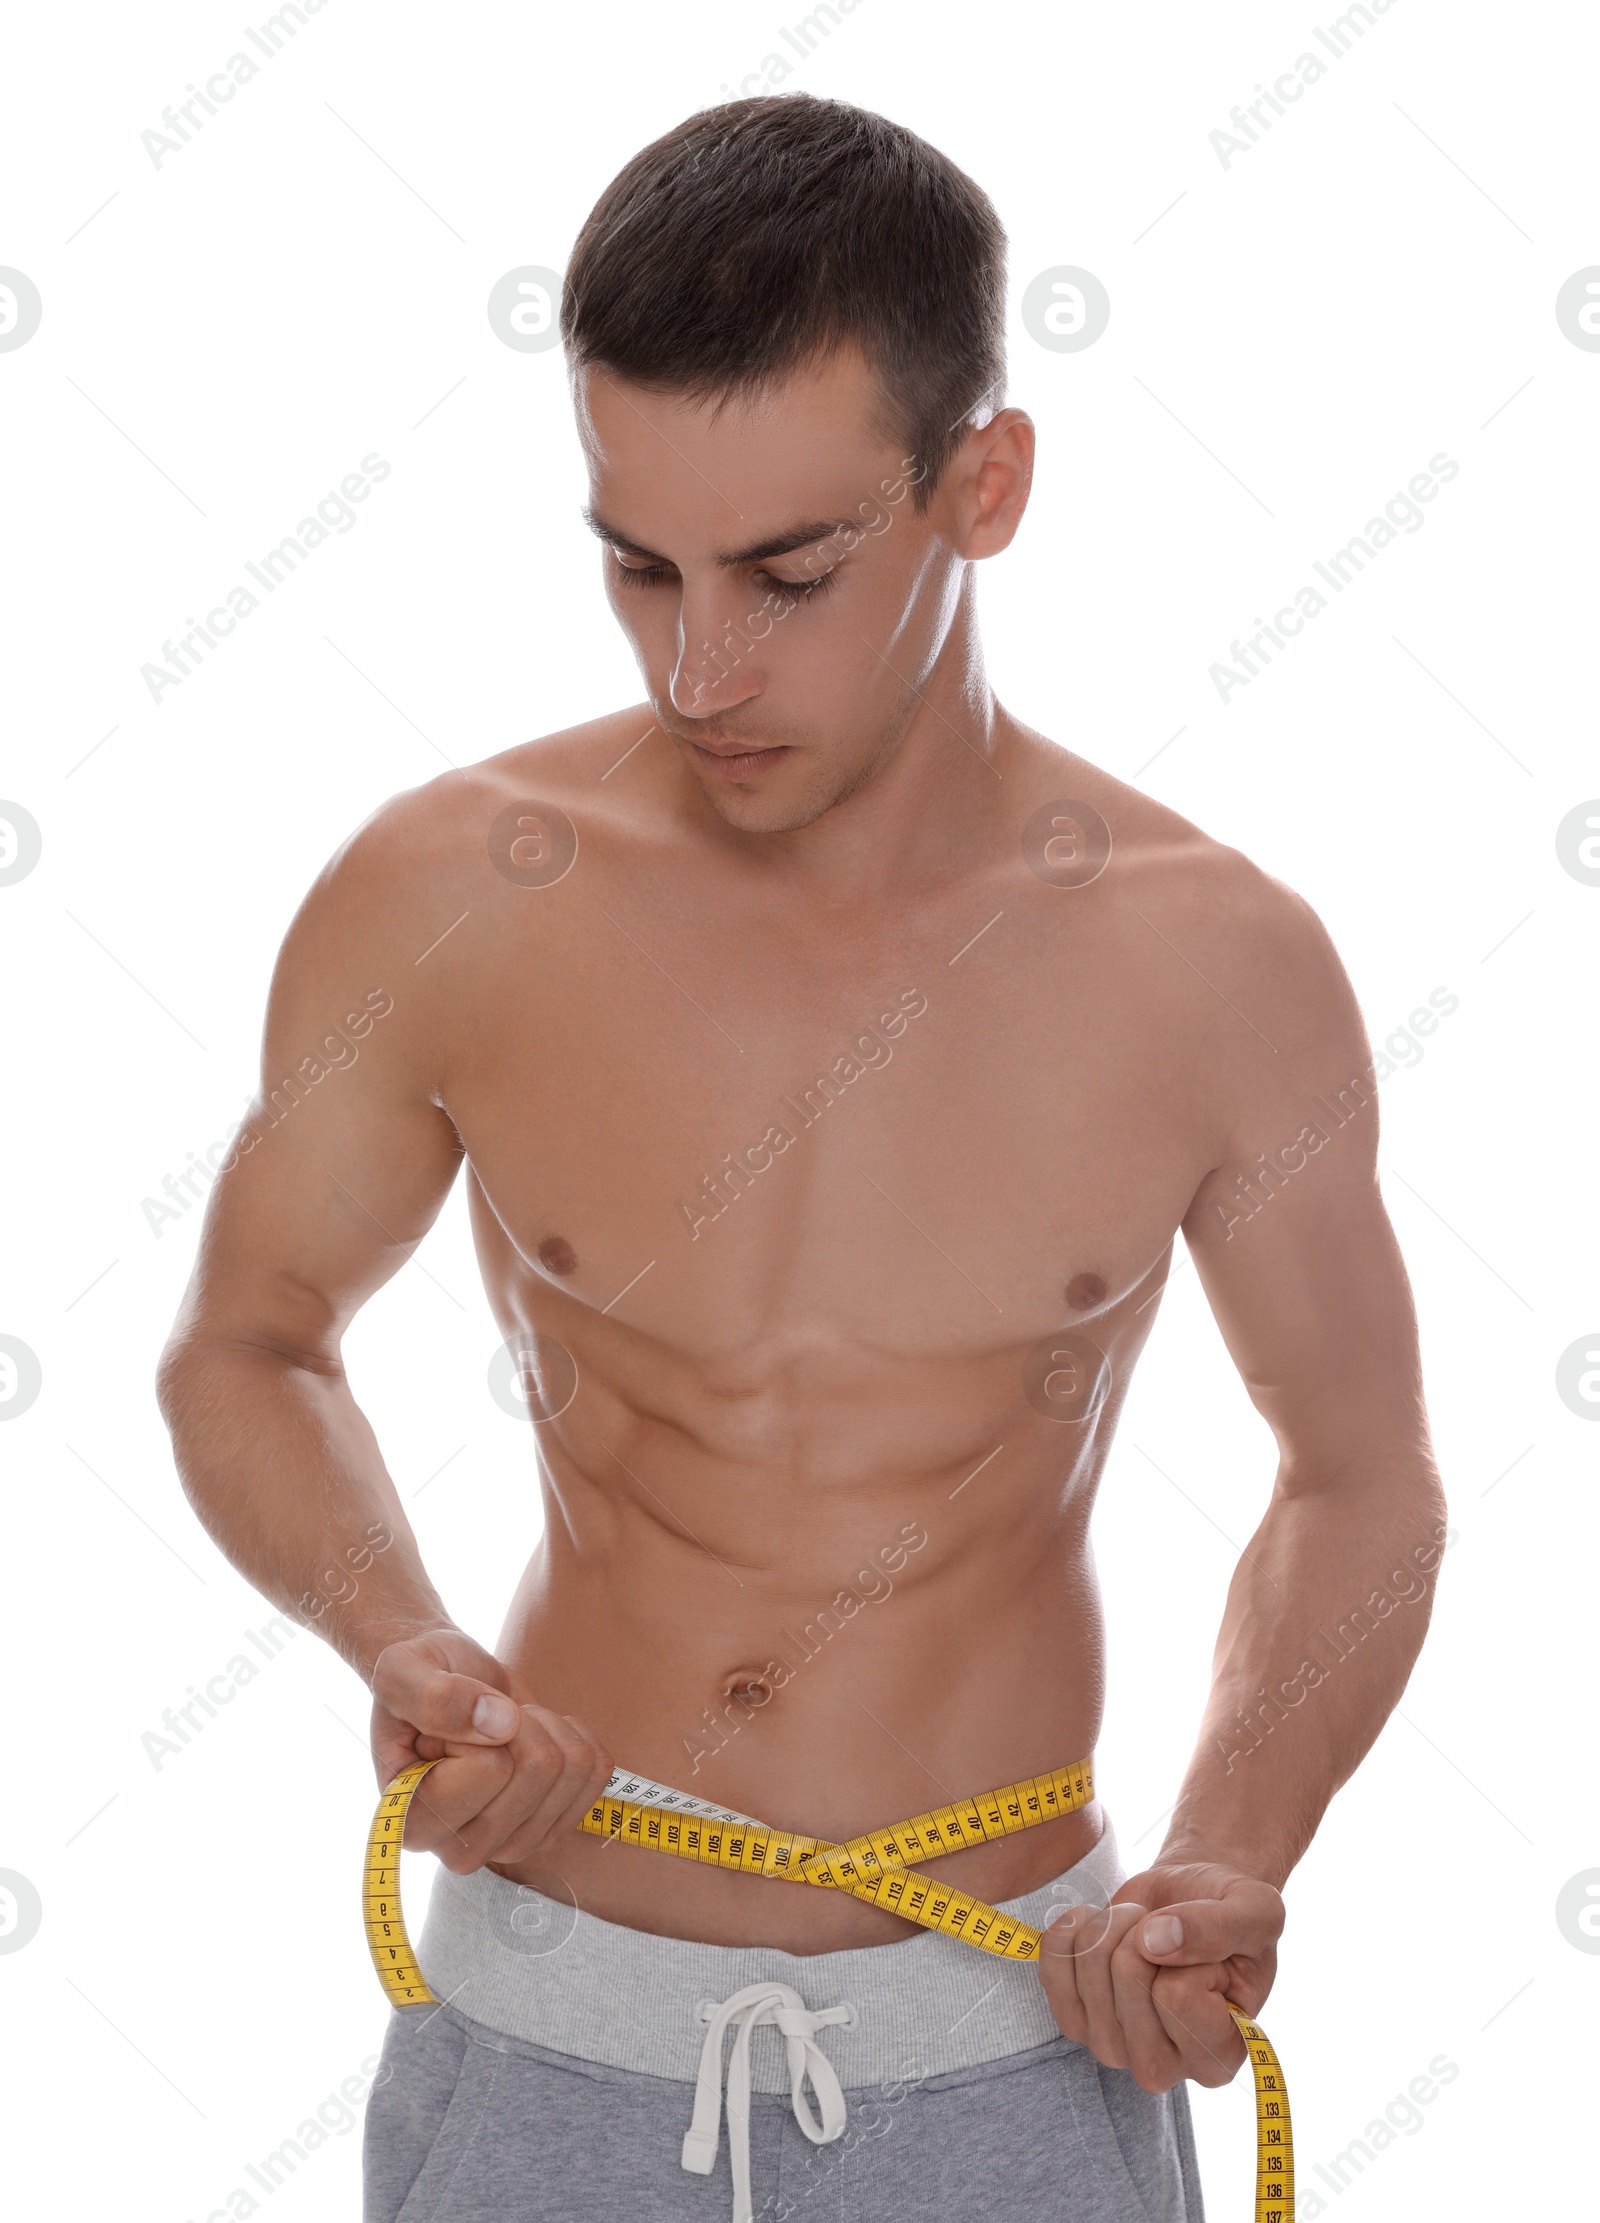 Photo of Handsome shirtless man with slim body and measuring tape around his waist isolated on white